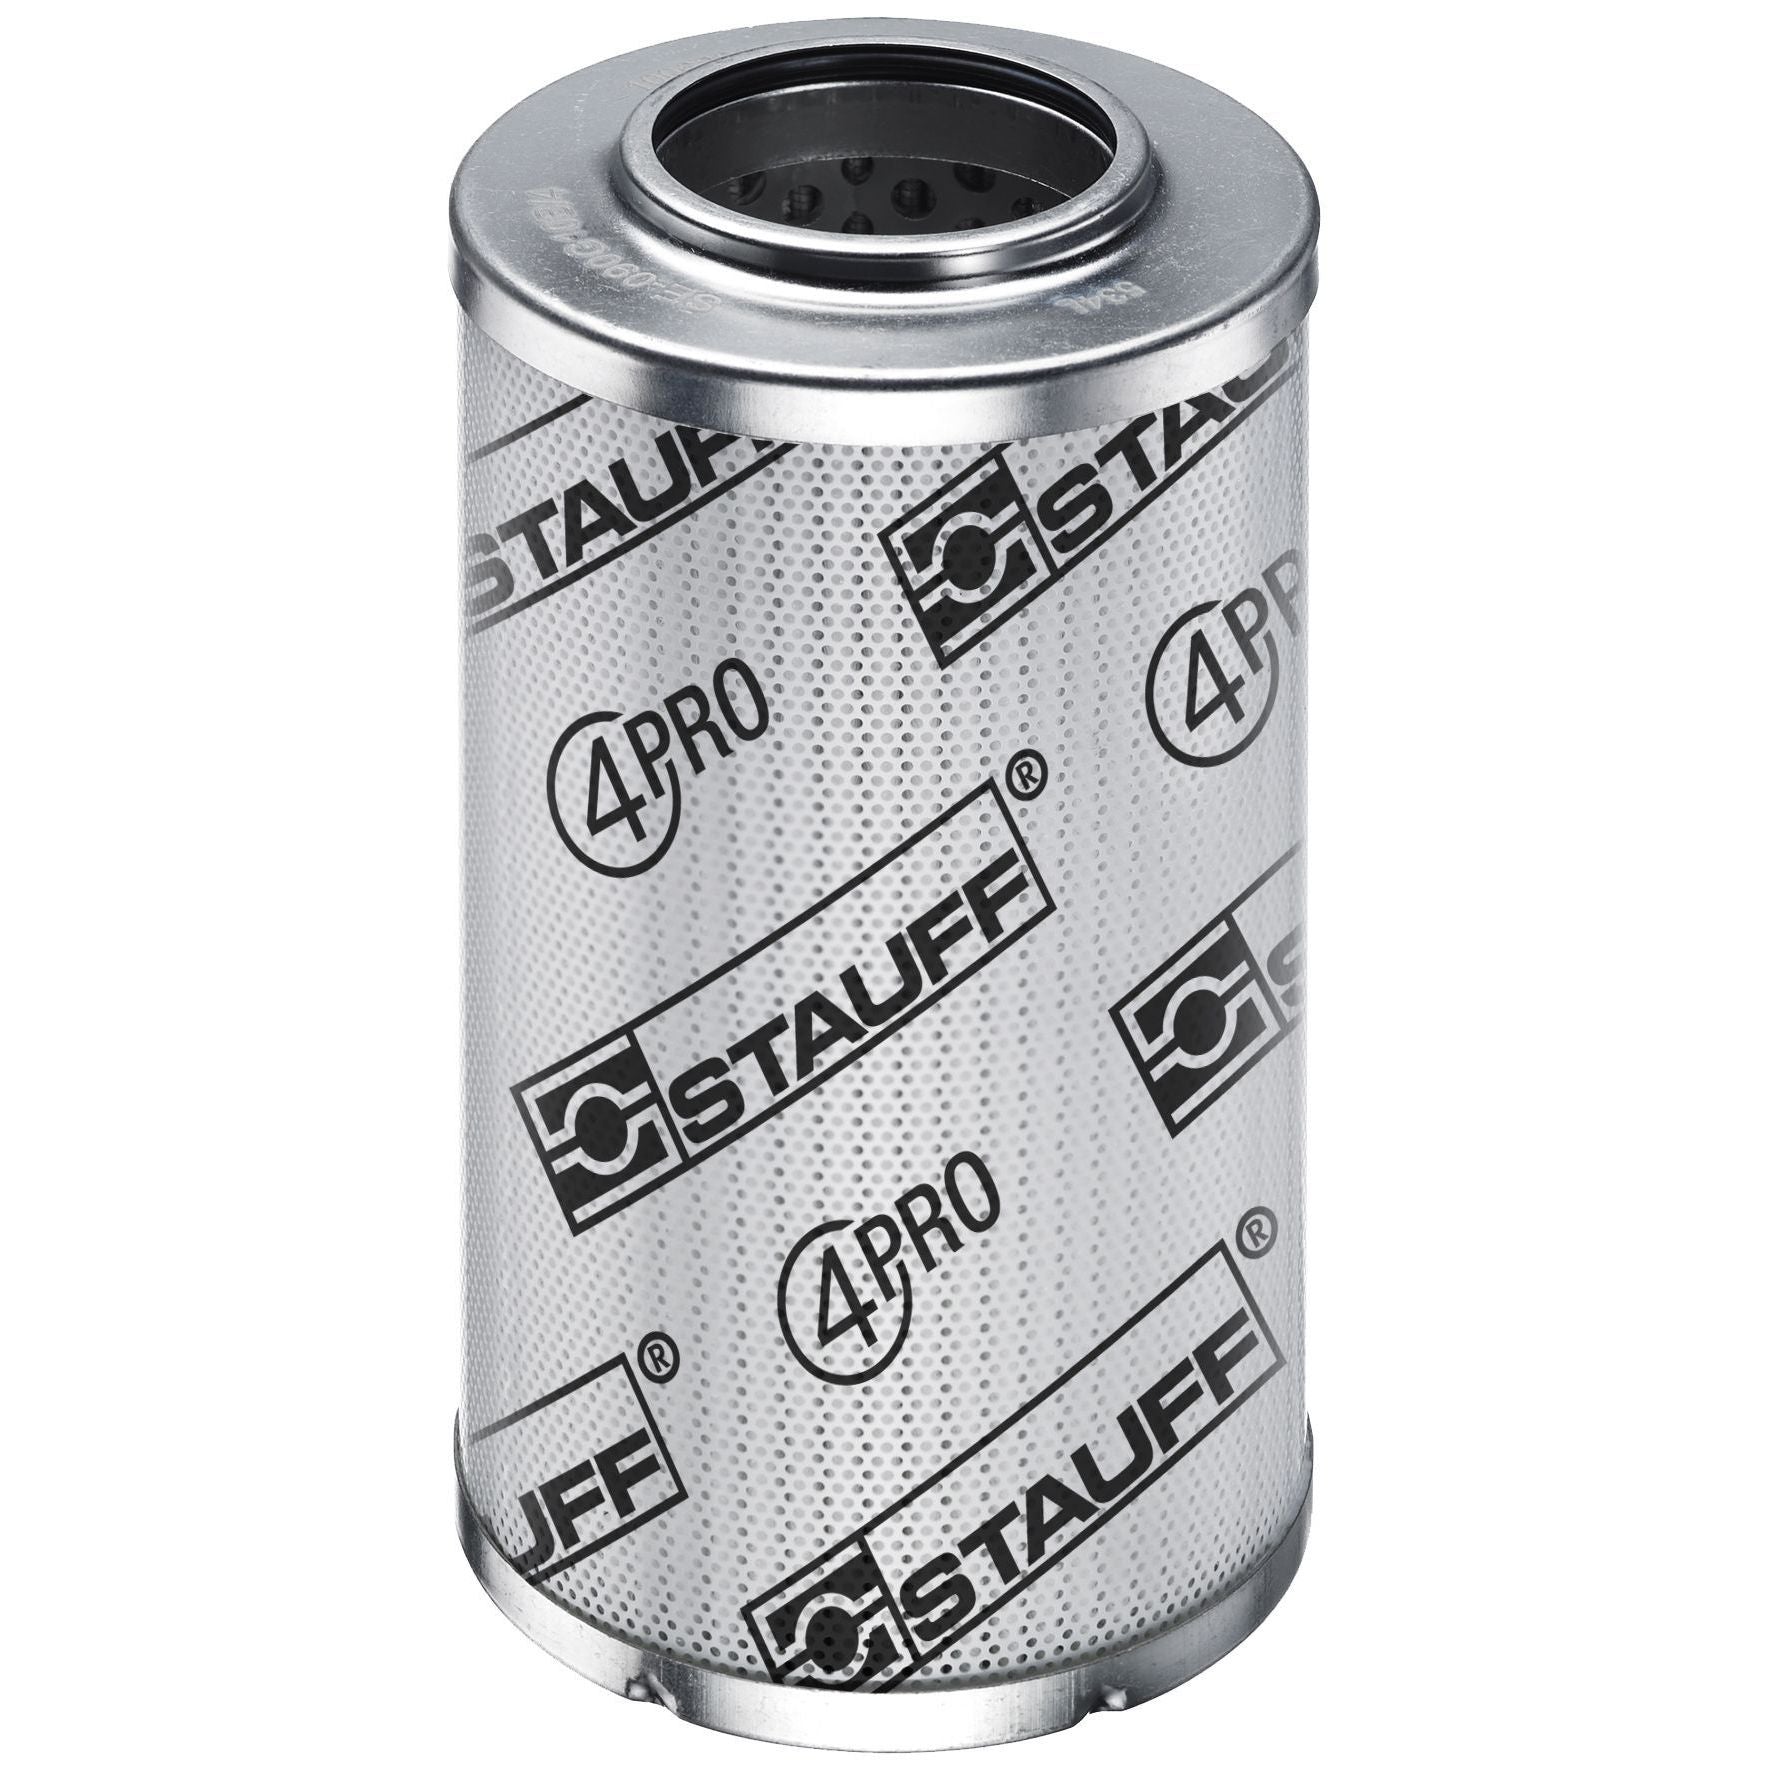 SE-070-G-20-B/4-1 : Stauff SF-070 Series Filter Element, 20 Micron, Synthetic, 363psi Collapse Differential, Buna